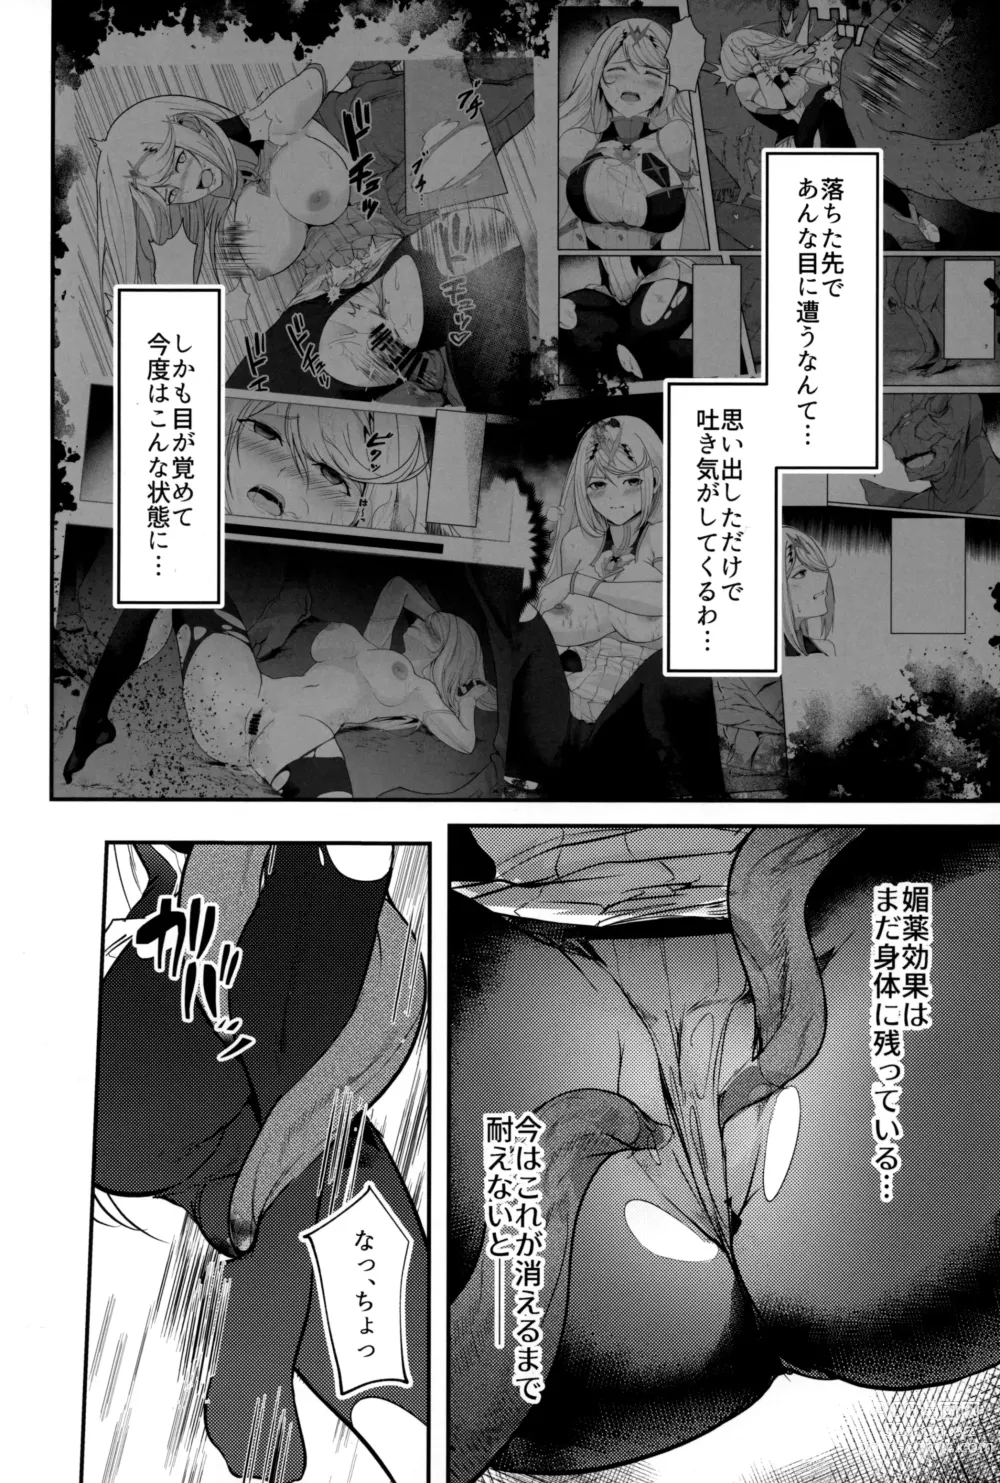 Page 5 of doujinshi Falling into The End